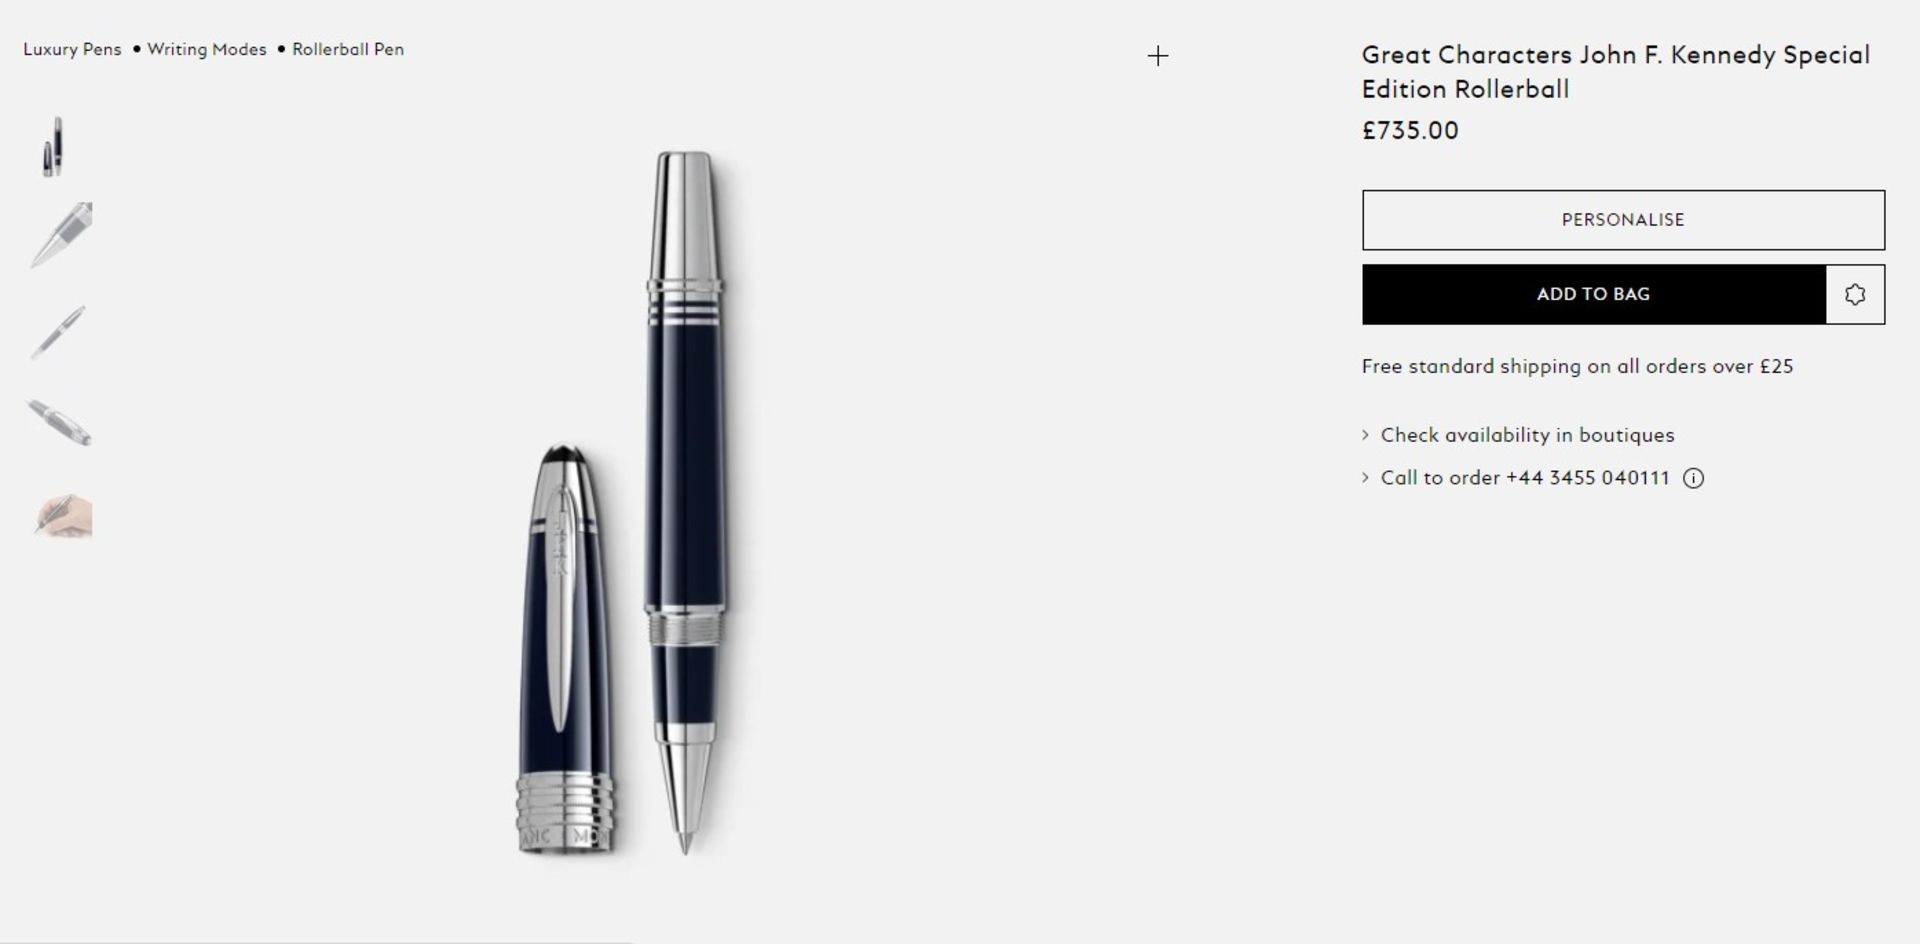 Montblanc-Great Characters John F. Kennedy Special Edition - Image 6 of 6